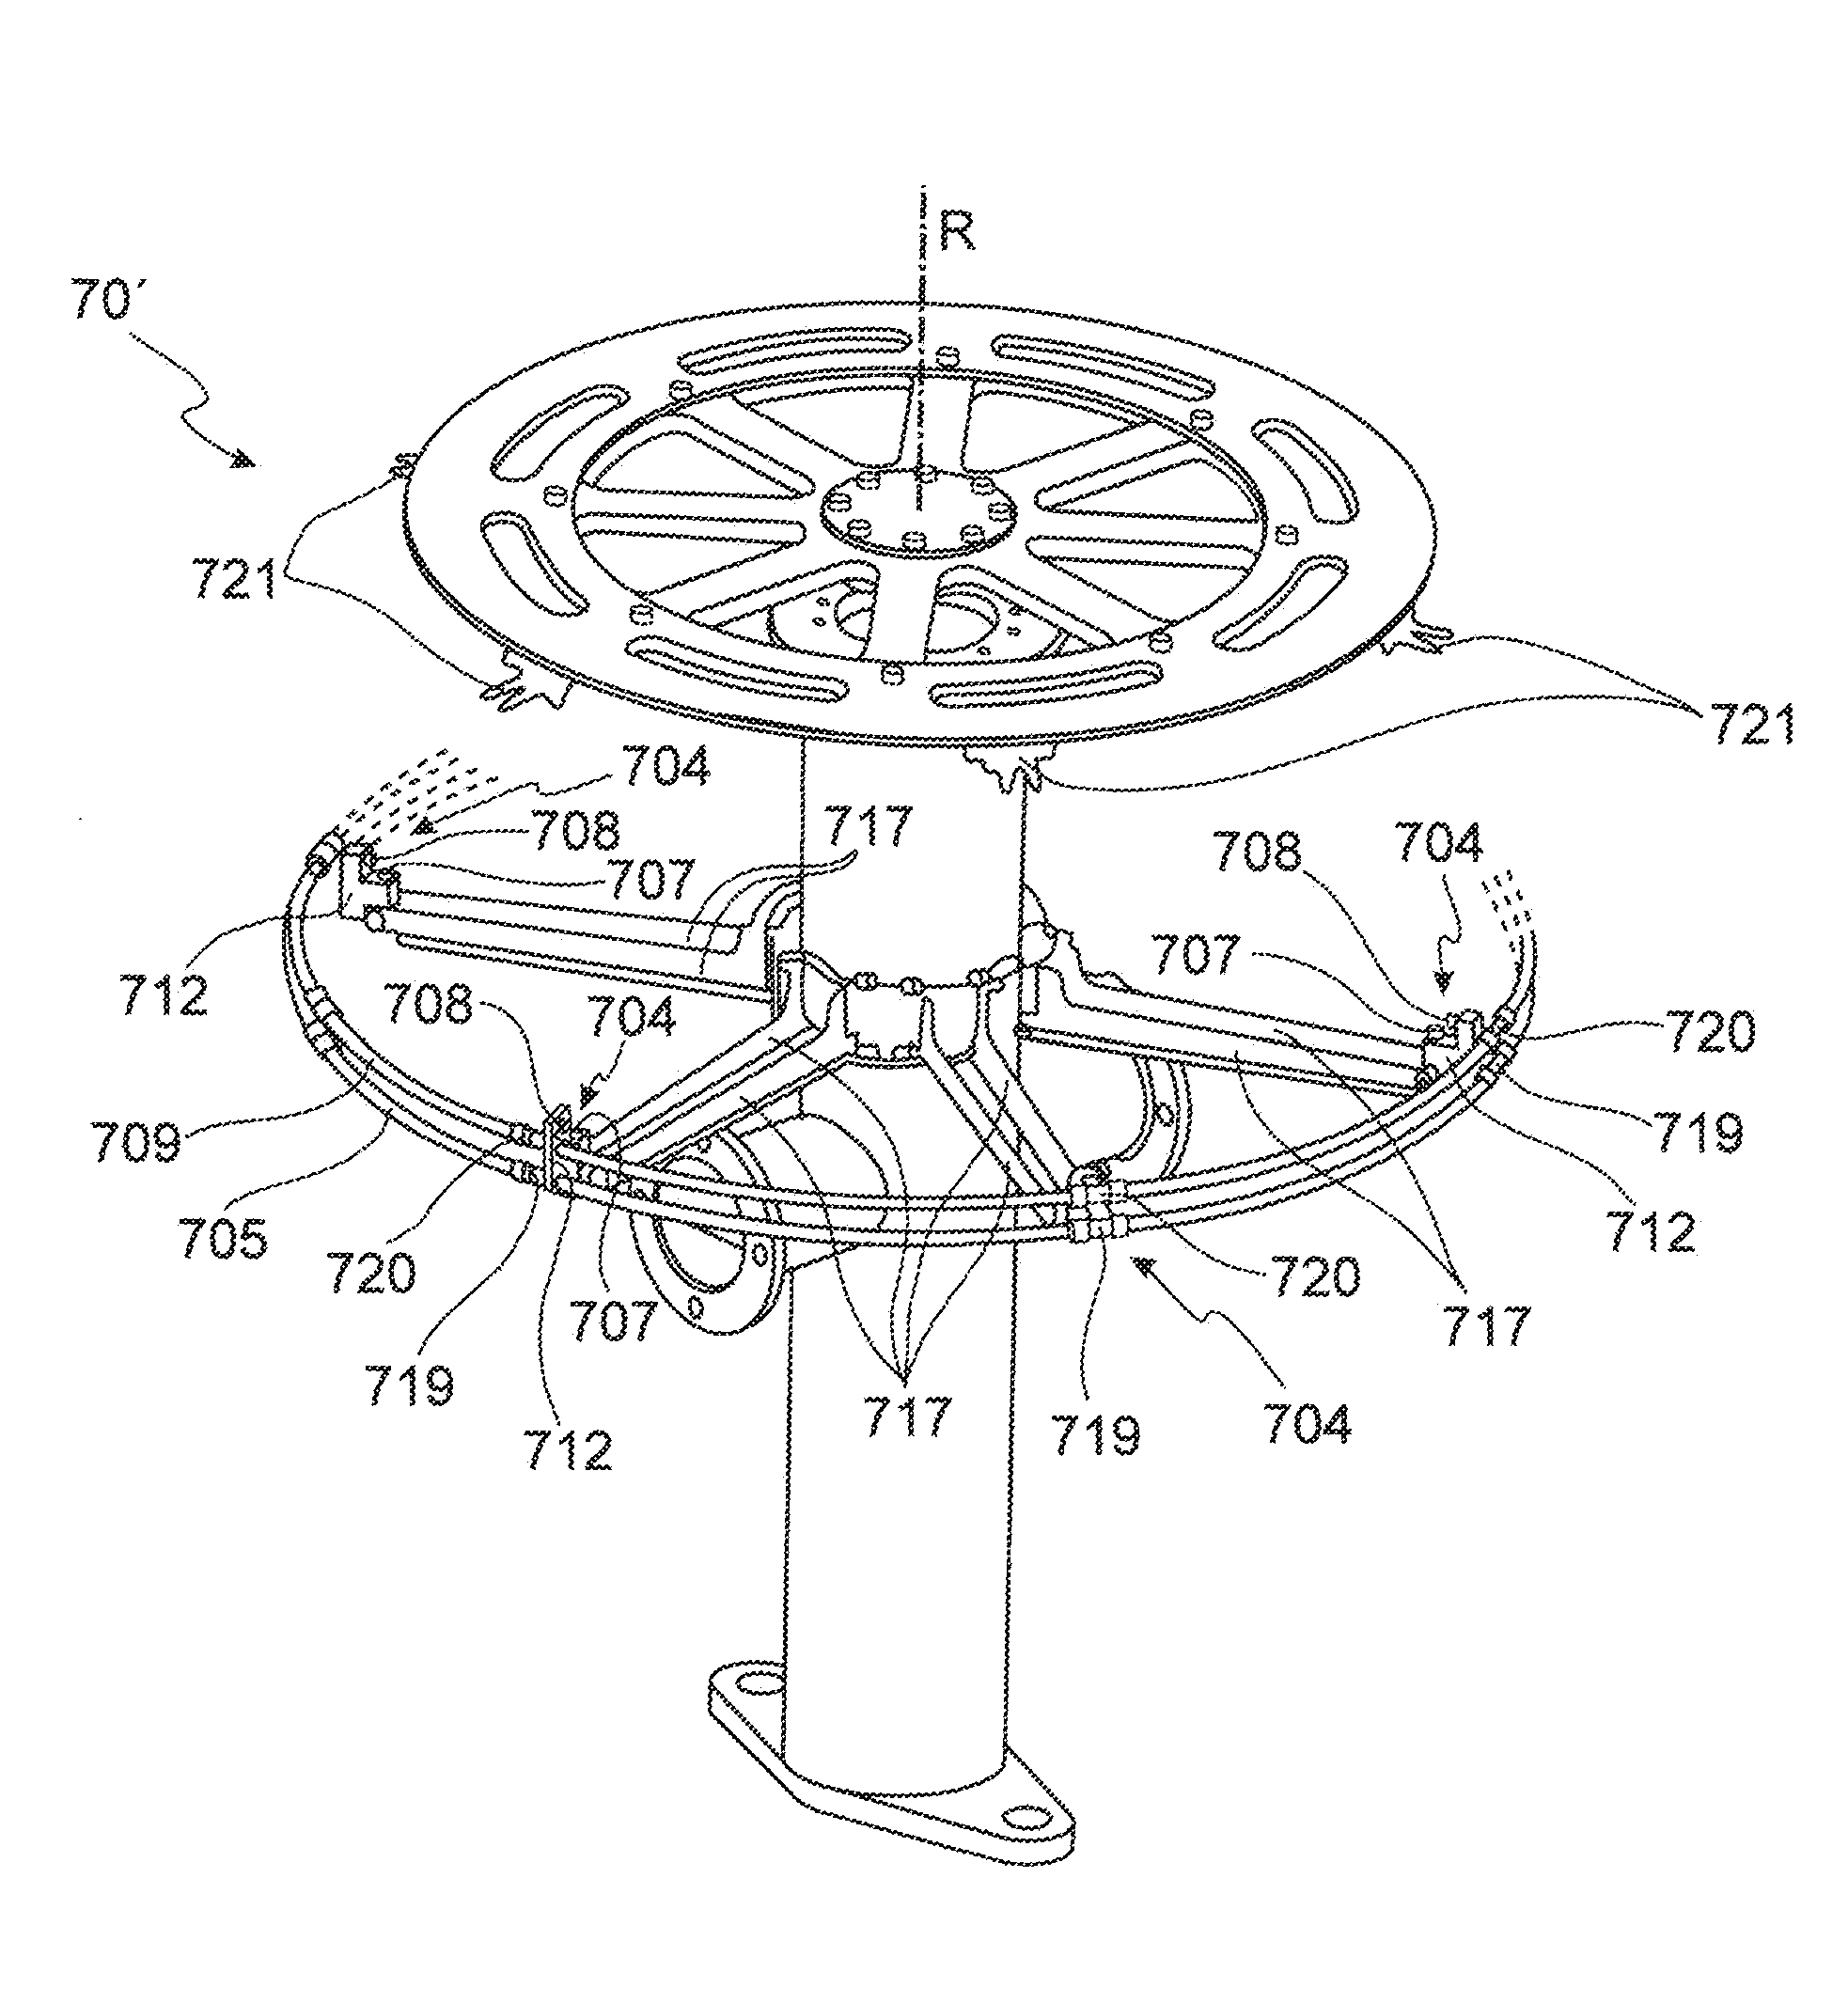 Machine and method for producing and filling containers